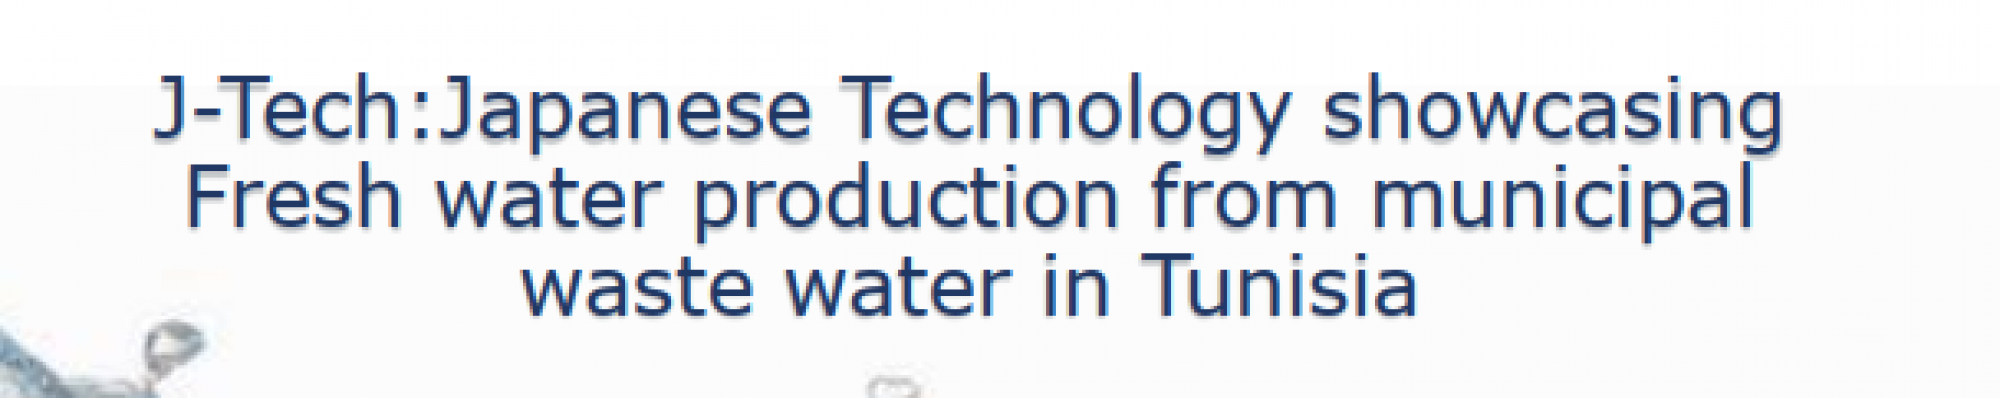 J-Tech:Japanese Technology showcasing Fresh water production from municipal waste water in Tunisia